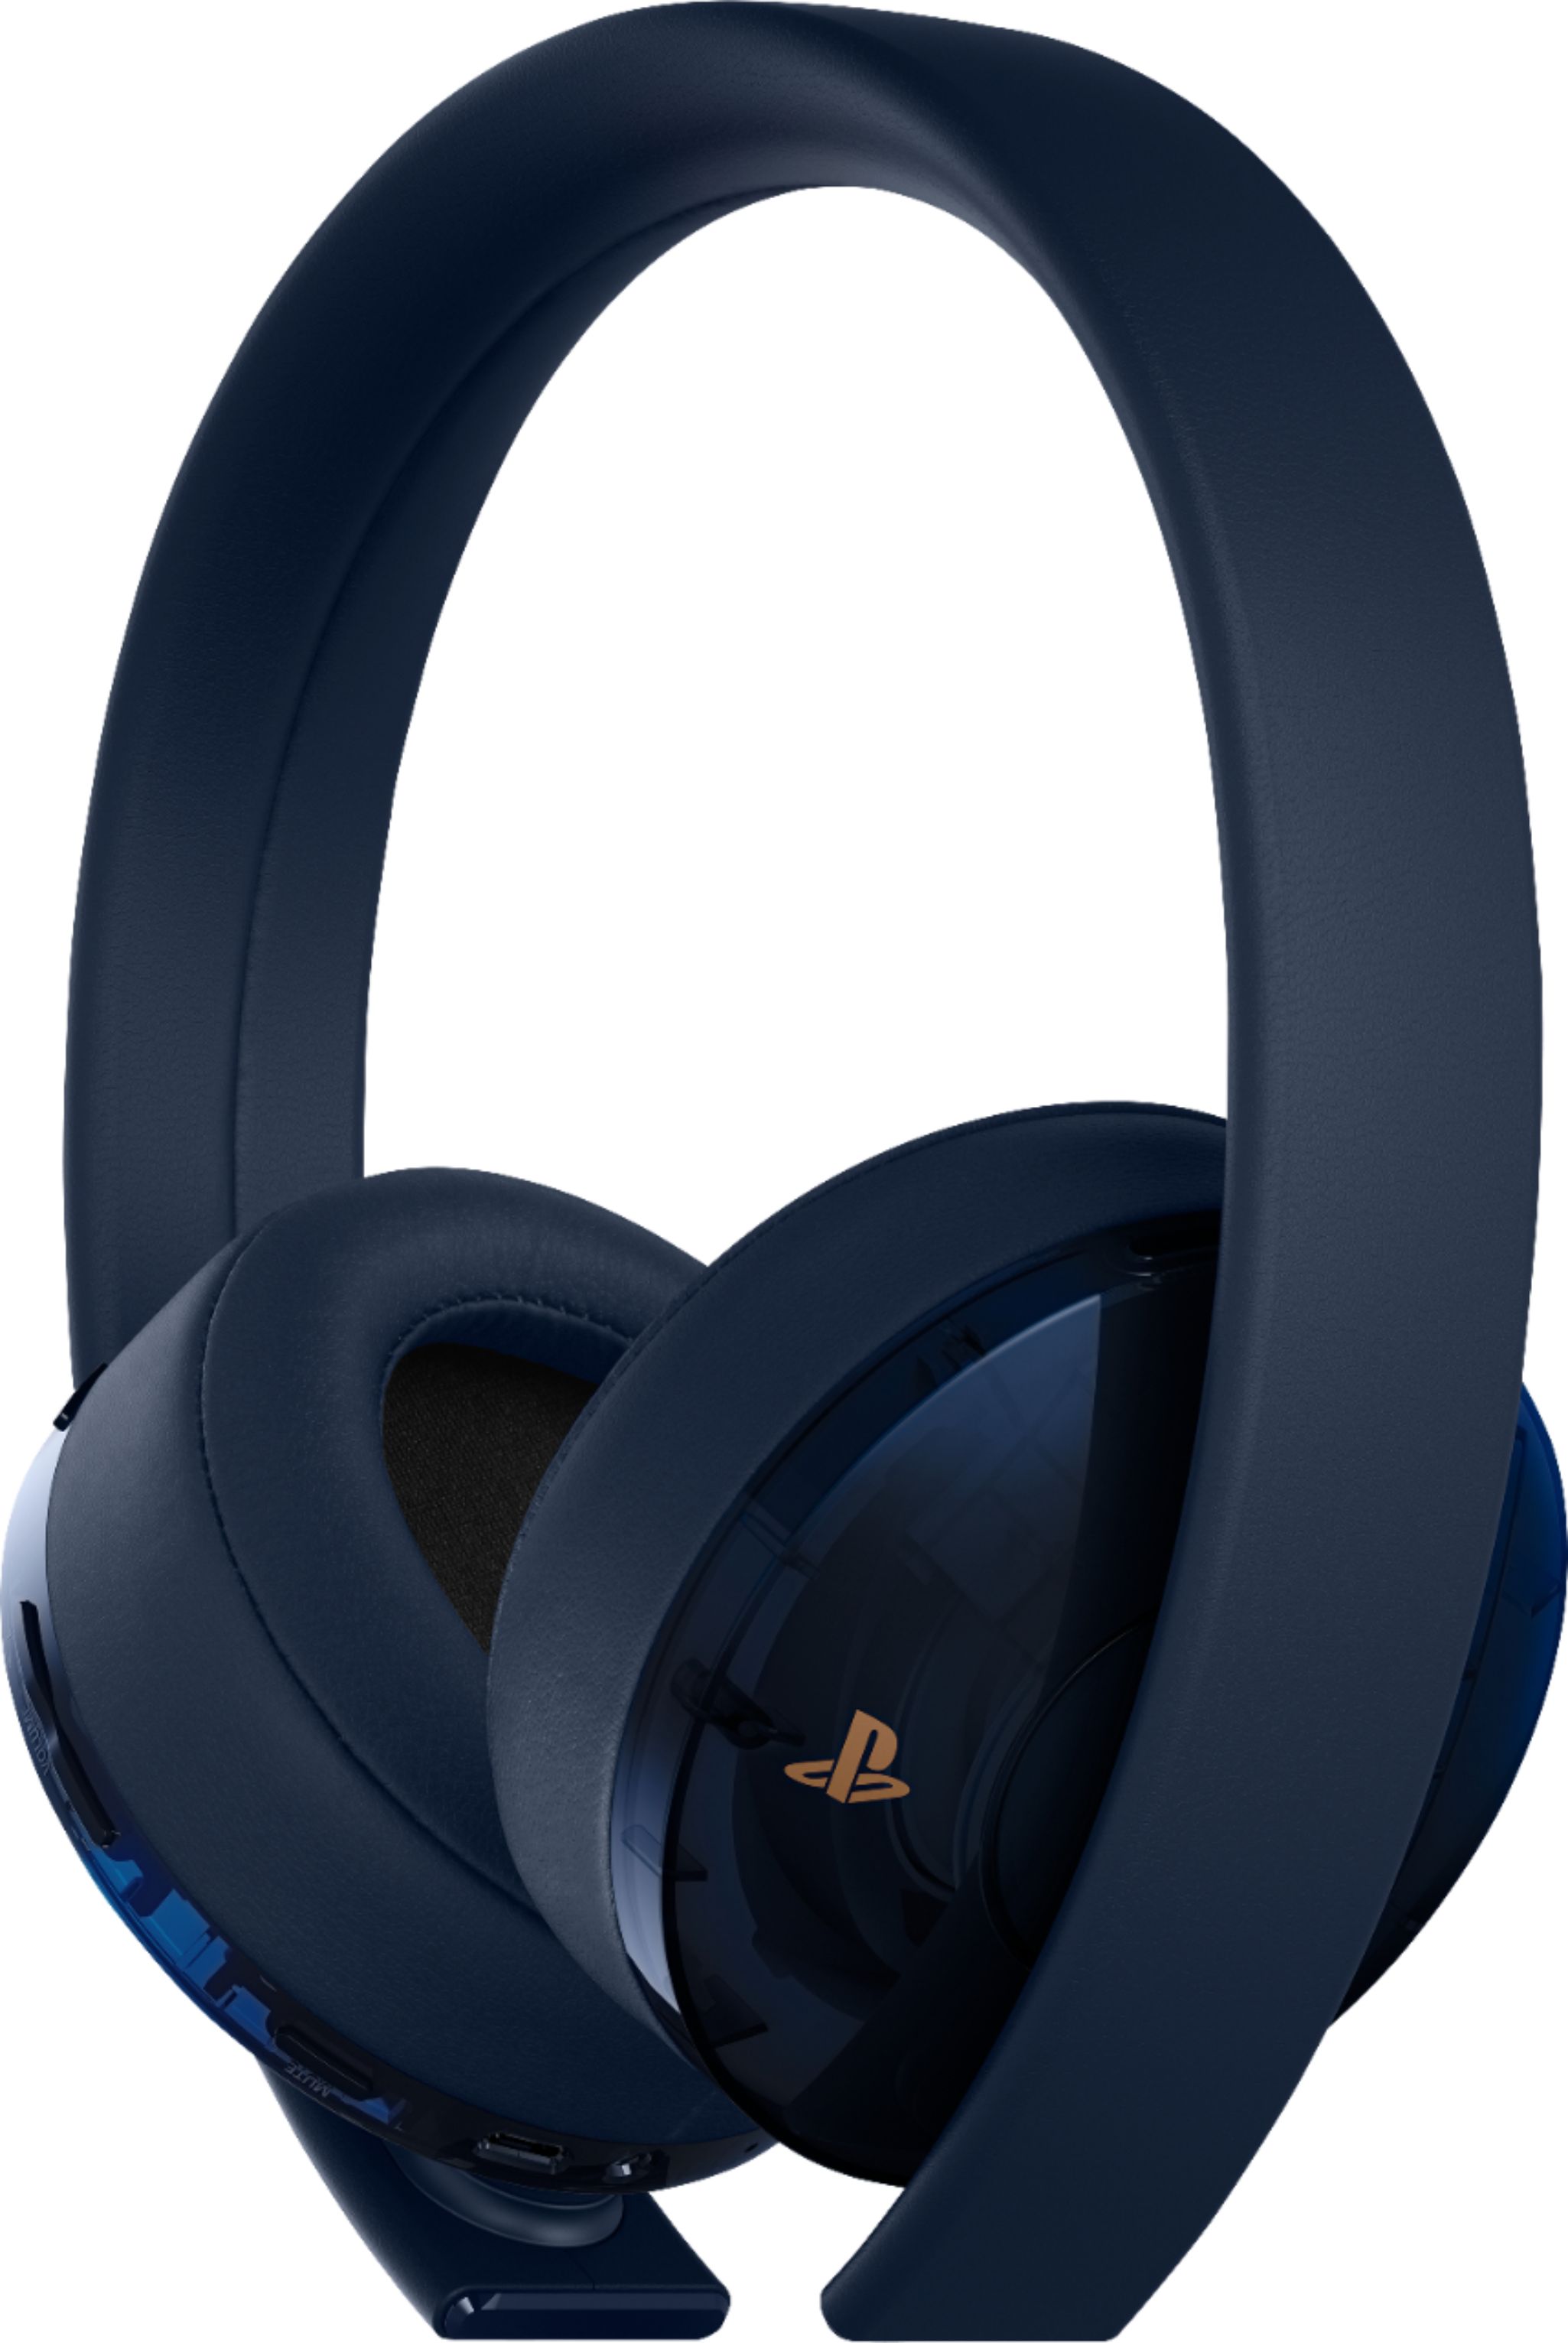 sony playstation gold wireless headset 500 million limited edition